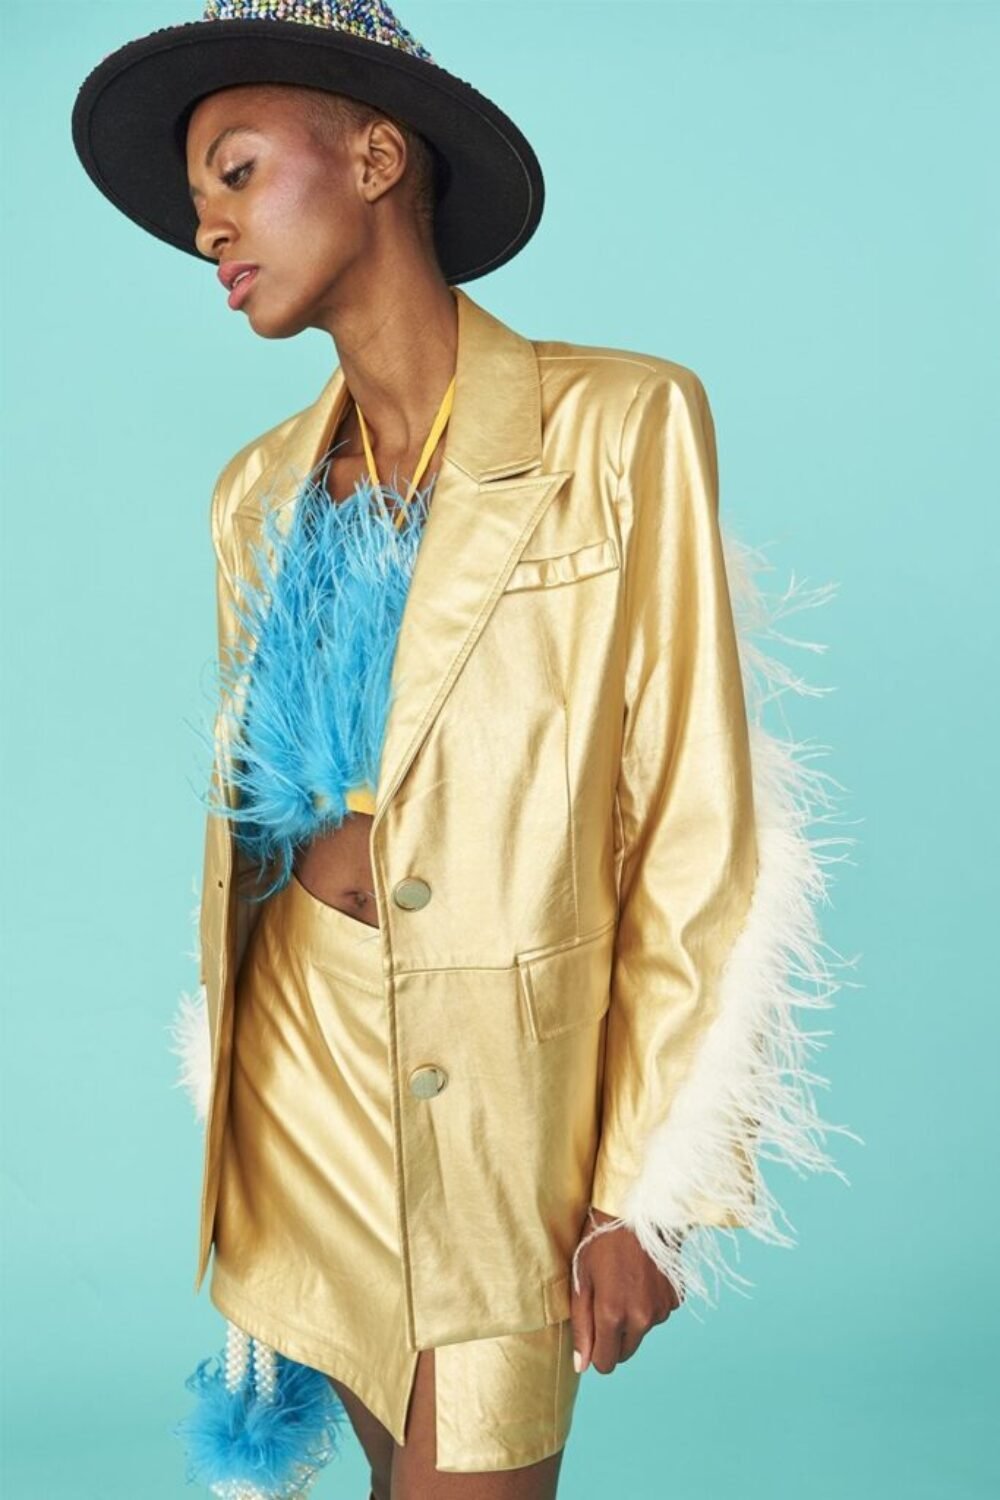 Shop Lux Gold Faux Leather Blazer with Feather Details and women's luxury and designer clothes at www.lux-apparel.co.uk